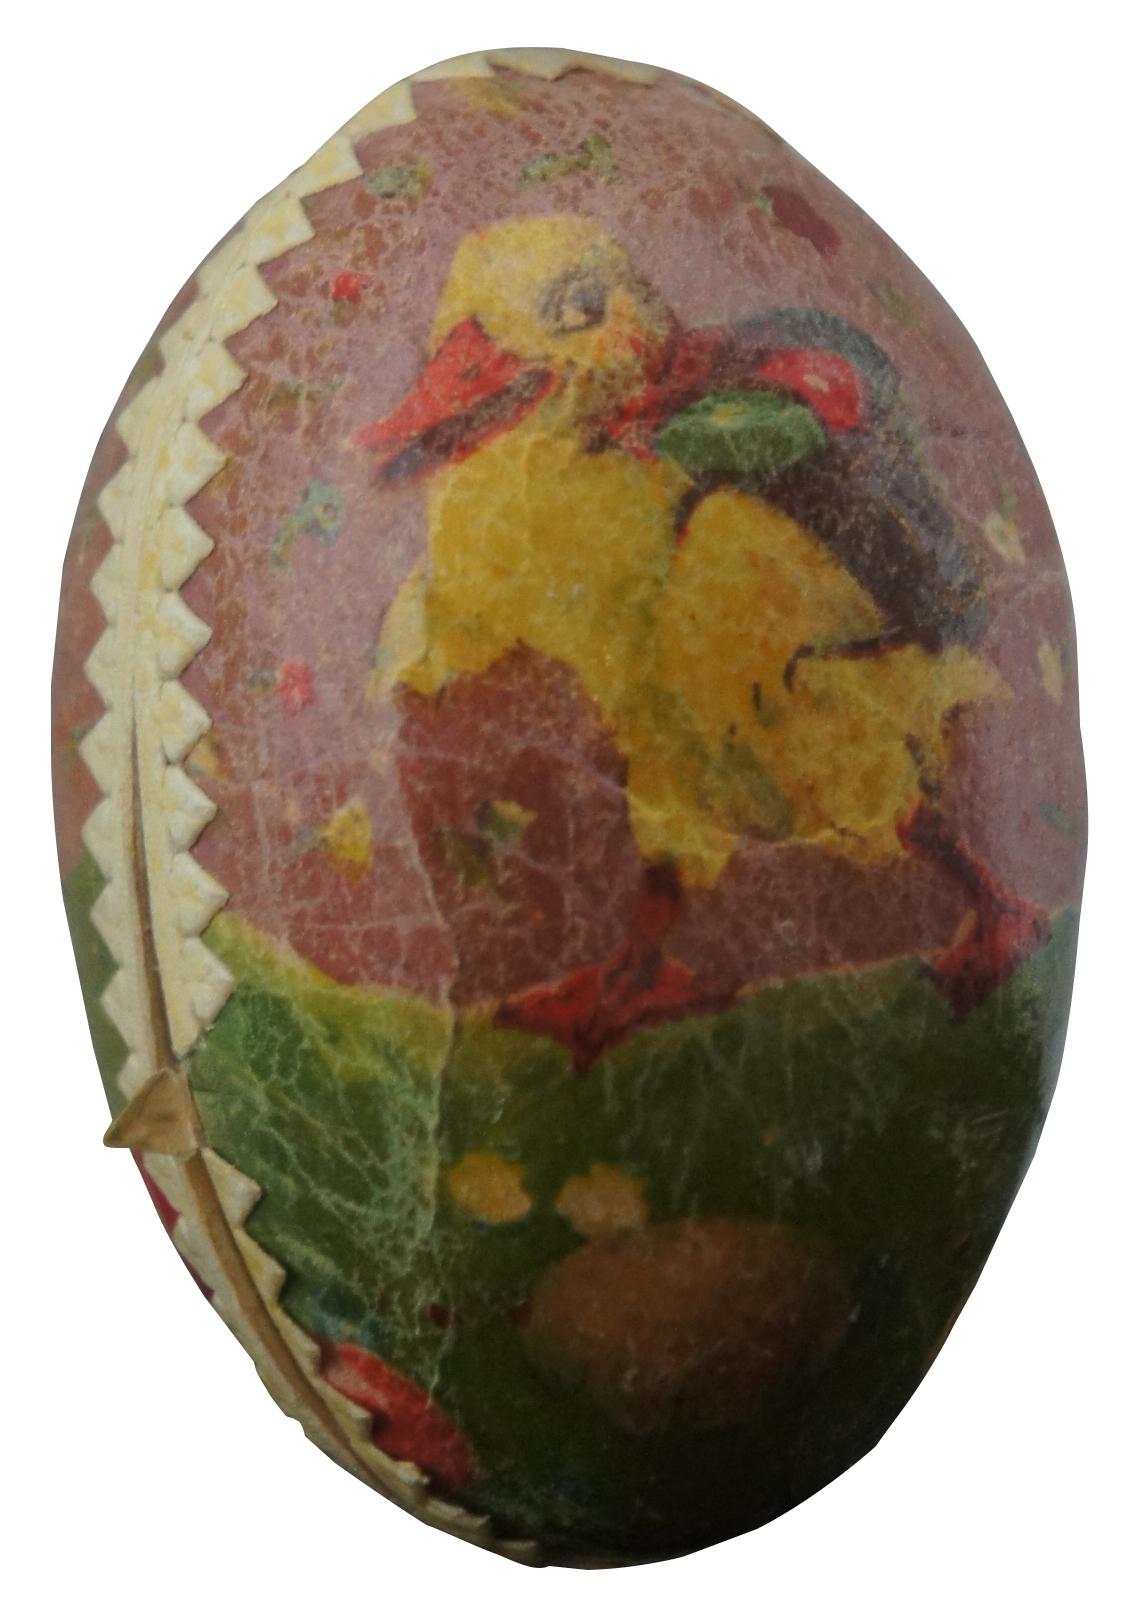 Antique German papier mâché Easter egg candy container, featuring a lithograph of a duck walking with a basket of eggs. Measure: 3